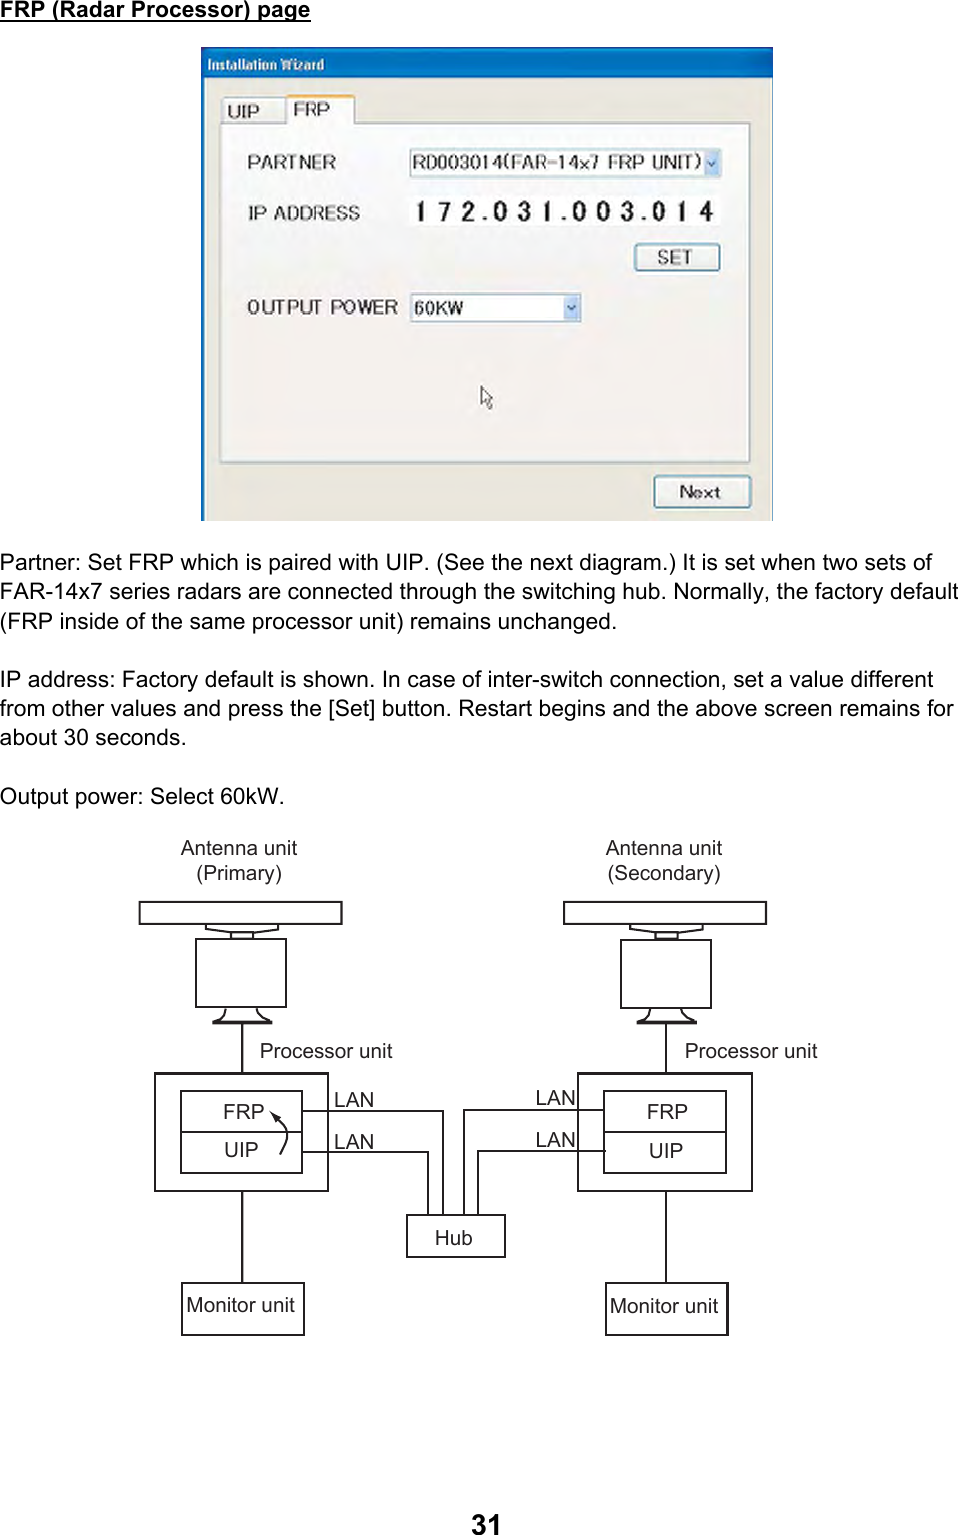  31FRP (Radar Processor) page  Partner: Set FRP which is paired with UIP. (See the next diagram.) It is set when two sets of FAR-14x7 series radars are connected through the switching hub. Normally, the factory default (FRP inside of the same processor unit) remains unchanged.  IP address: Factory default is shown. In case of inter-switch connection, set a value different from other values and press the [Set] button. Restart begins and the above screen remains for about 30 seconds.  Output power: Select 60kW. UIPFRPUIPFRPFRPUIPFRPUIPLANLANLANLANAntenna unit (Primary)Antenna unit (Secondary)Processor unit Processor unitHubMonitor unit Monitor unit 